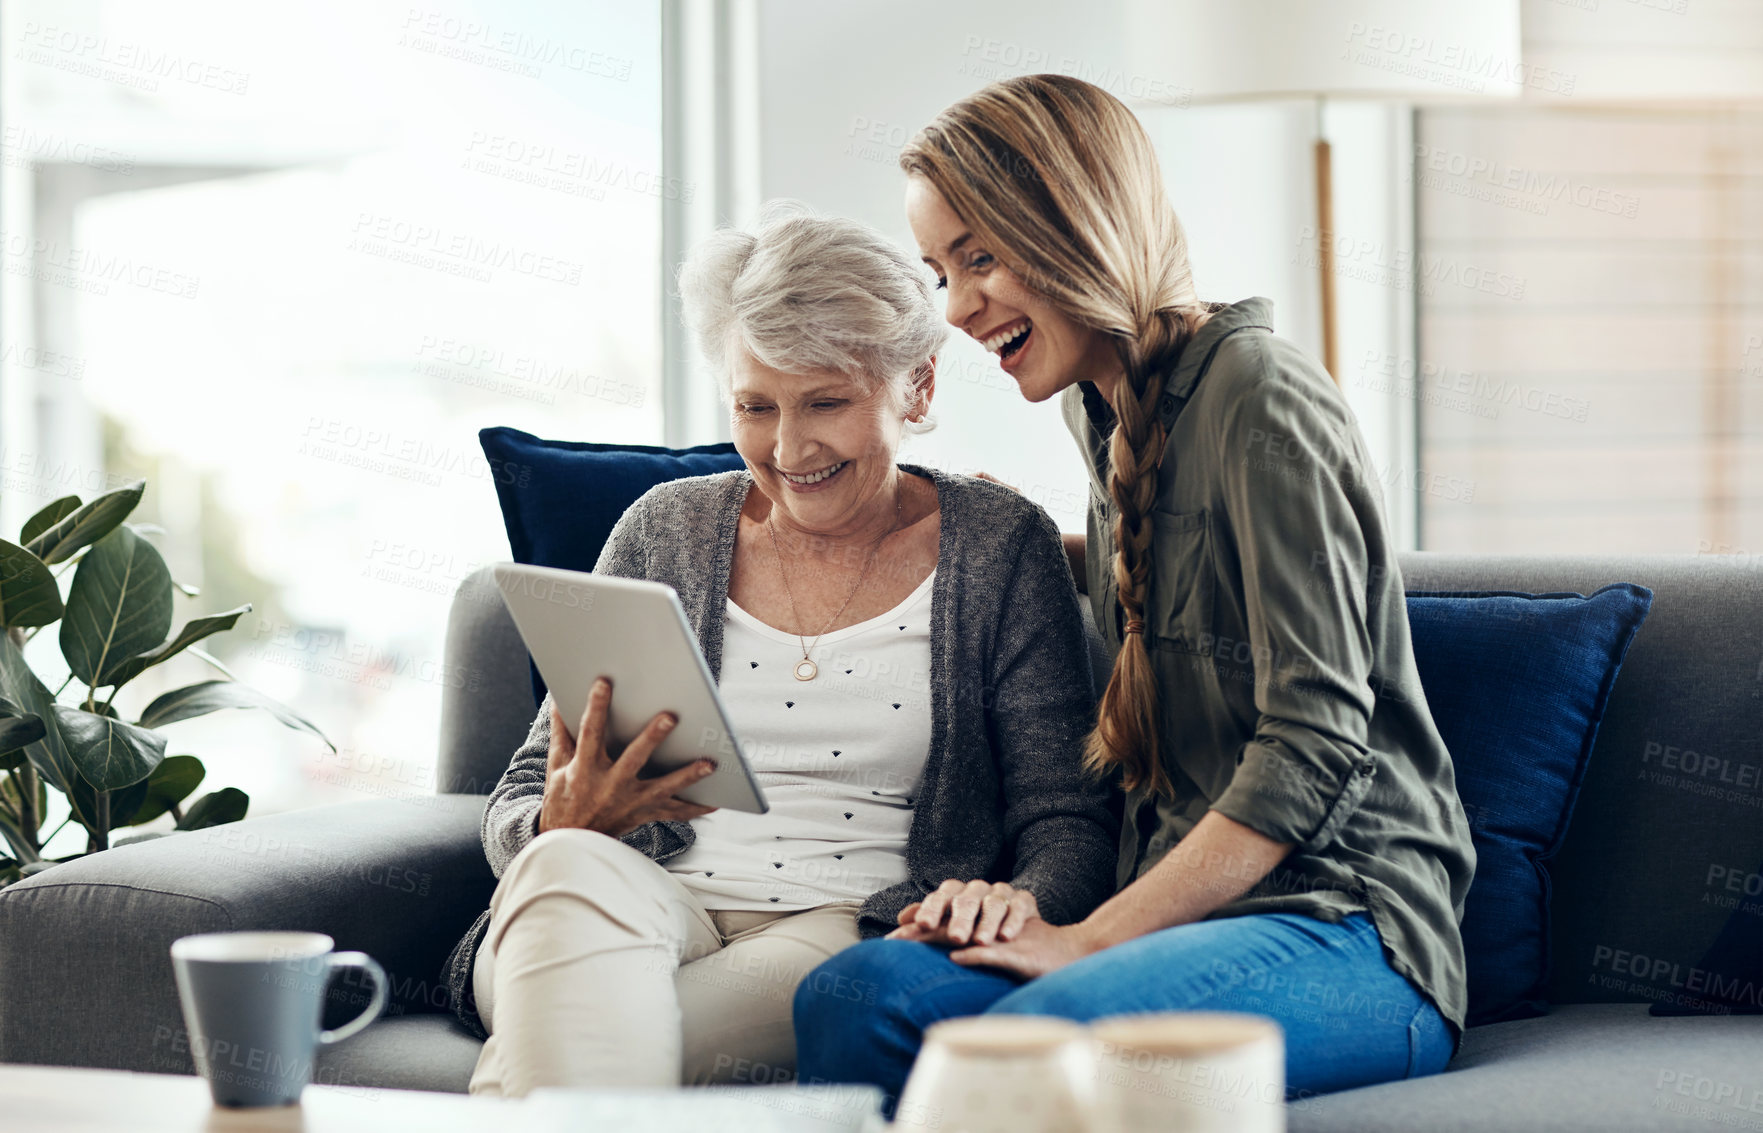 Buy stock photo Shot of a senior woman and her daughter using a digital tablet together